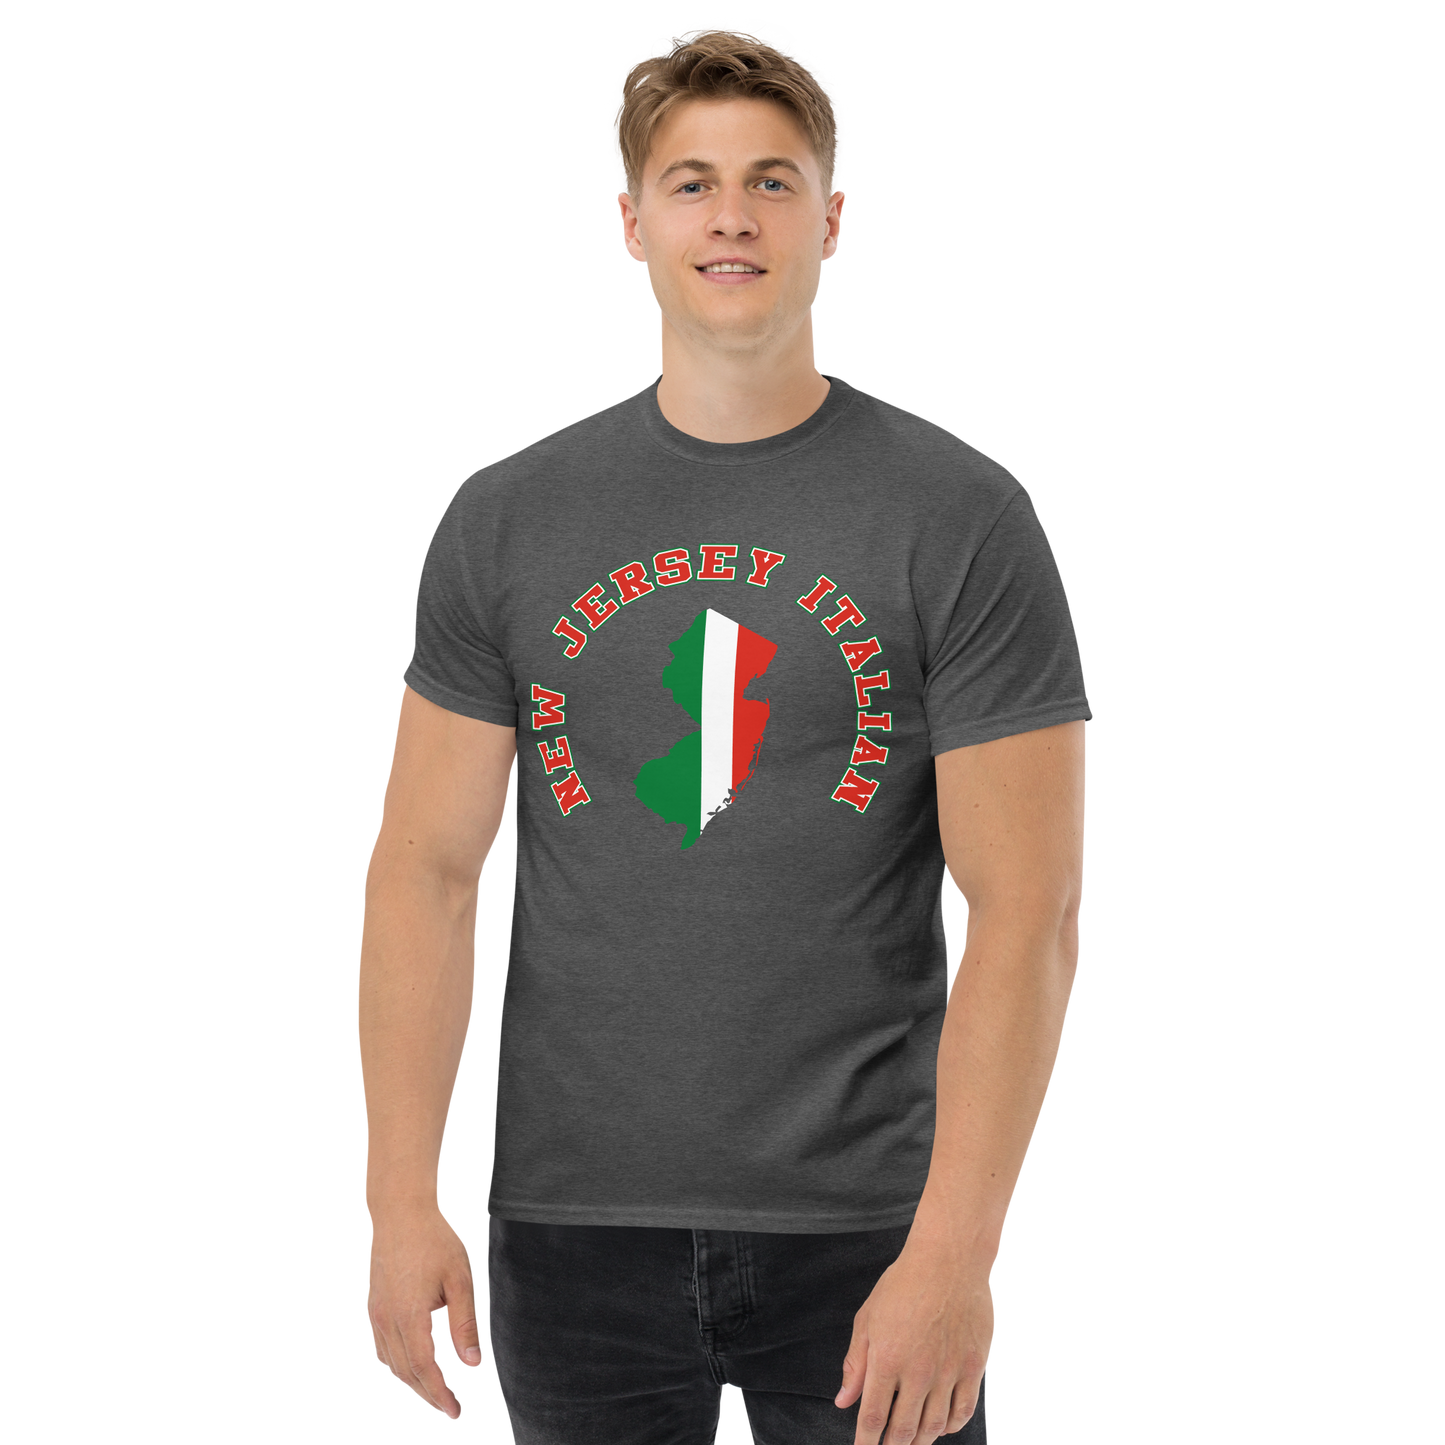 State of New Jersey Italian Flag T-Shirt: Wear Your Jersey-Italian Pride! -Vintage Flag Tee for New Jersey Italians